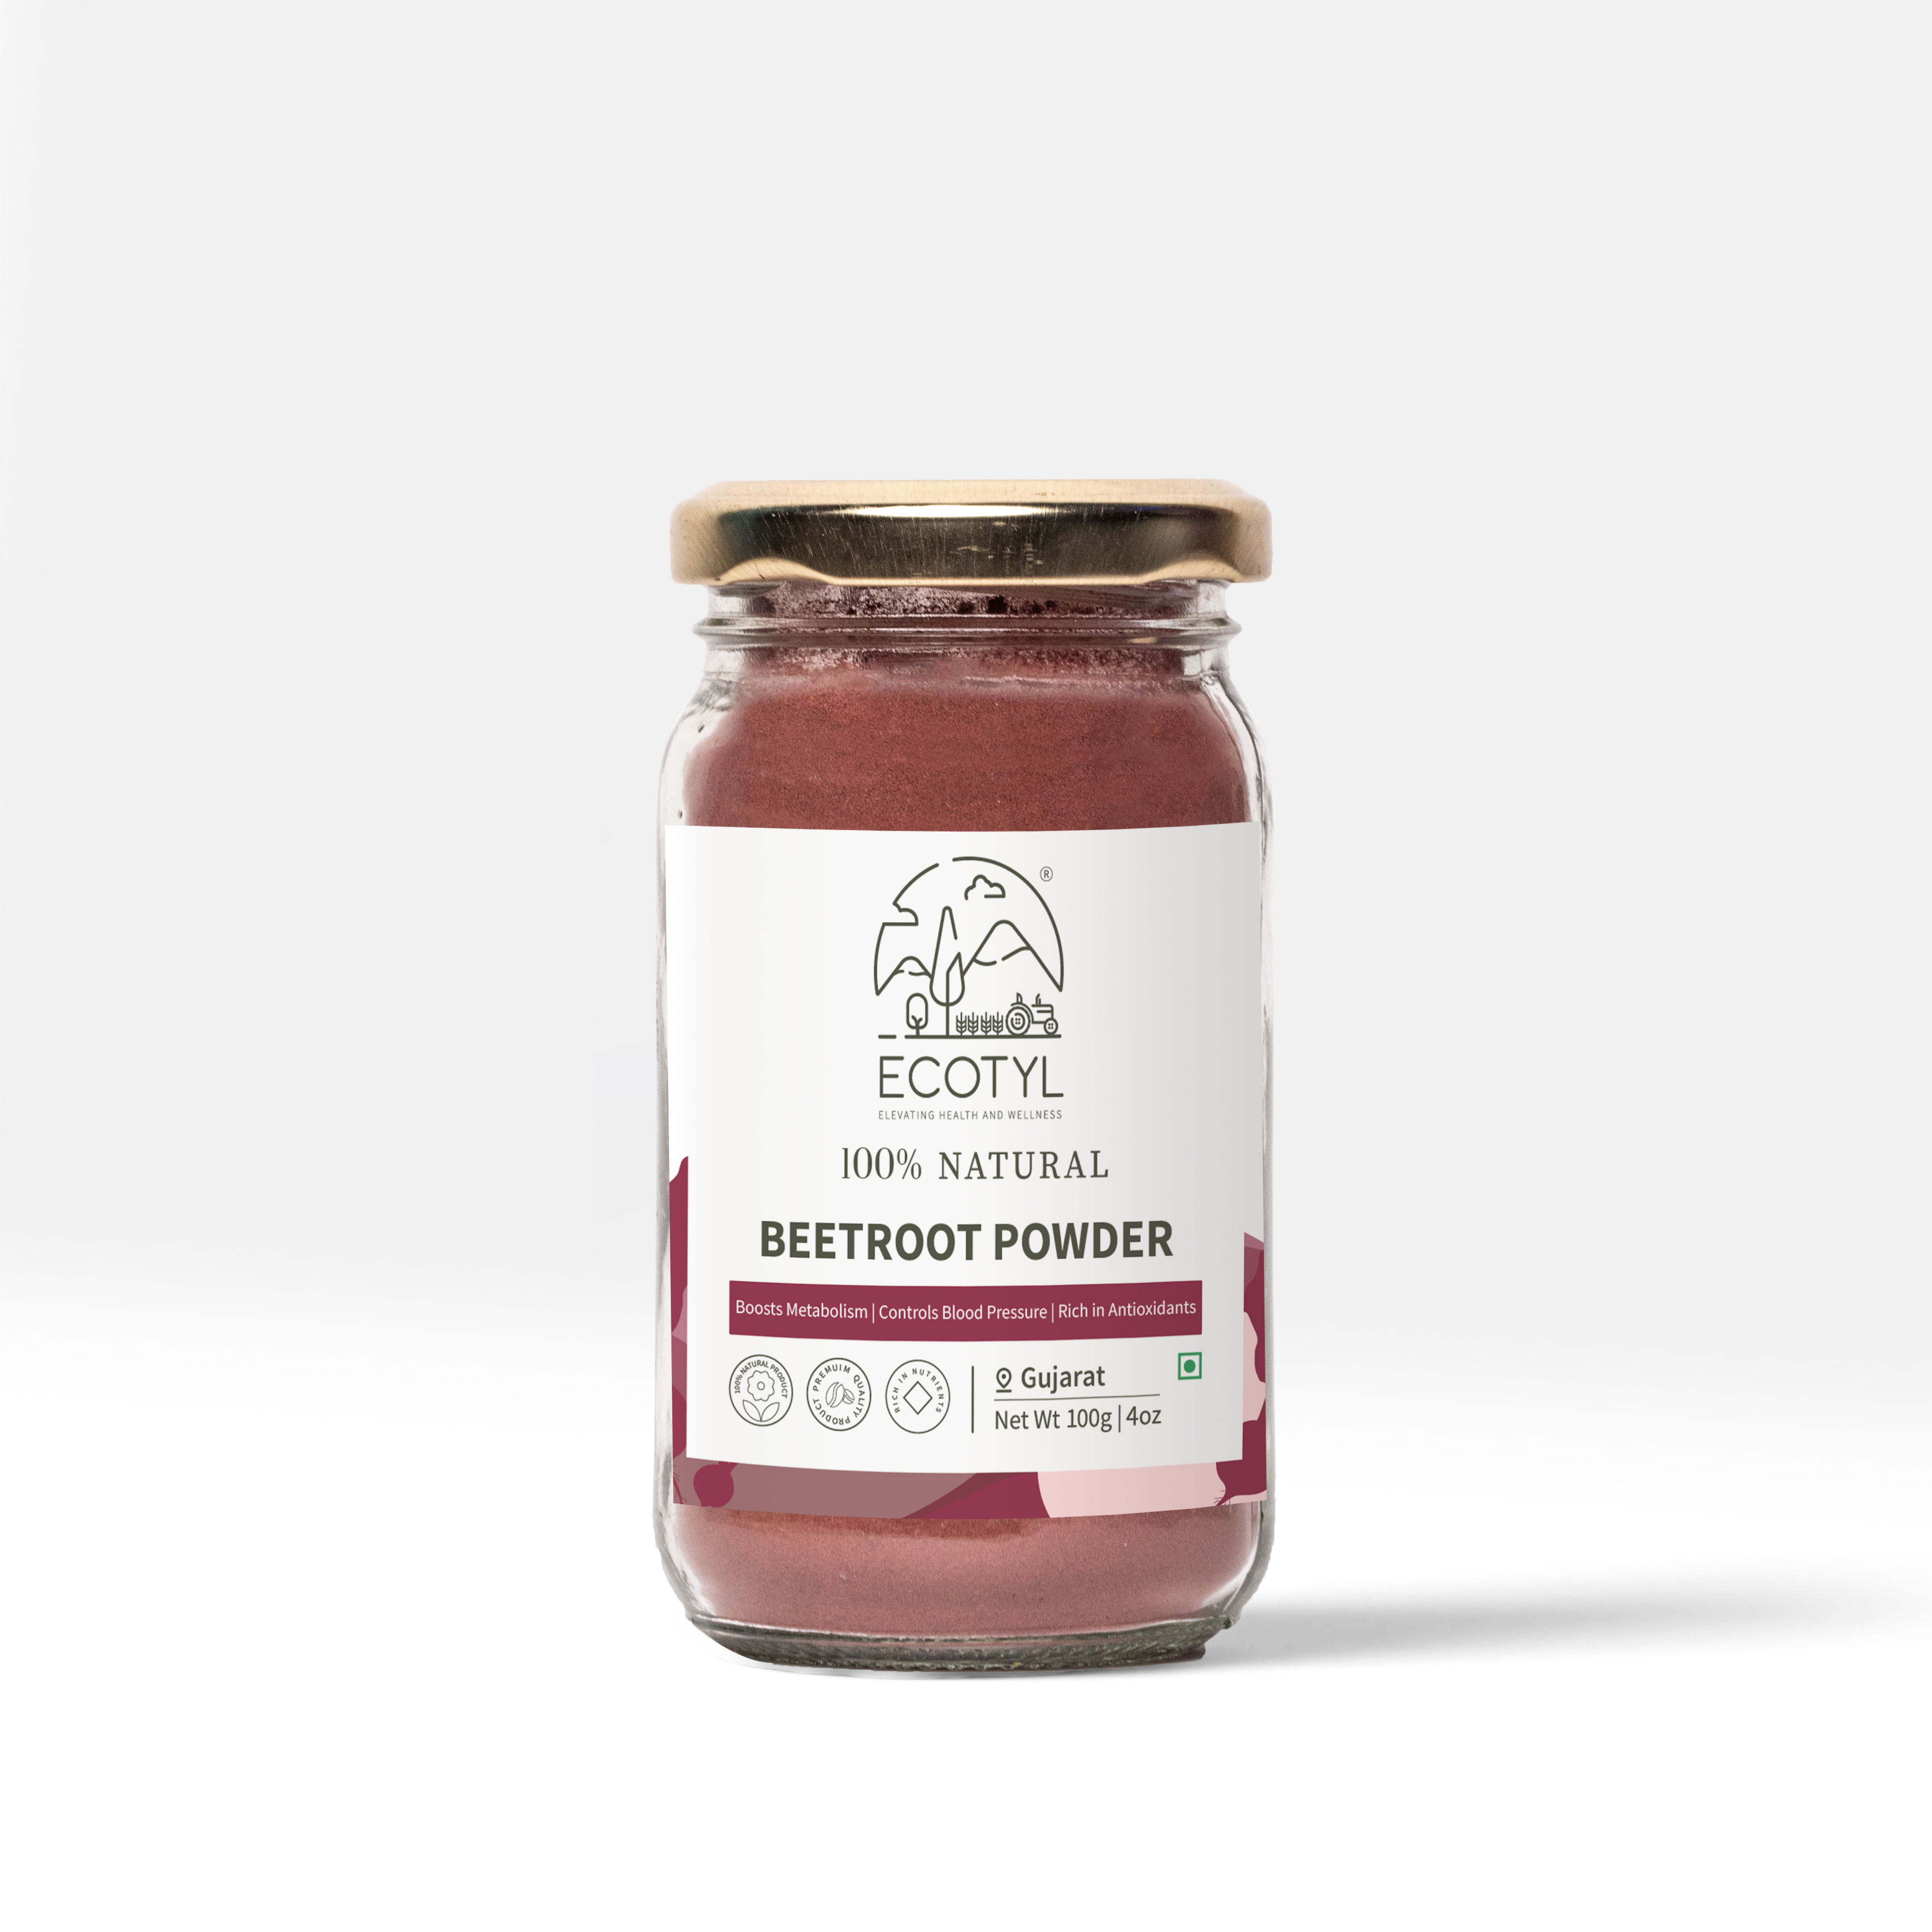 Buy Ecotyl Beetroot Powder - 100 g at Best Price Online